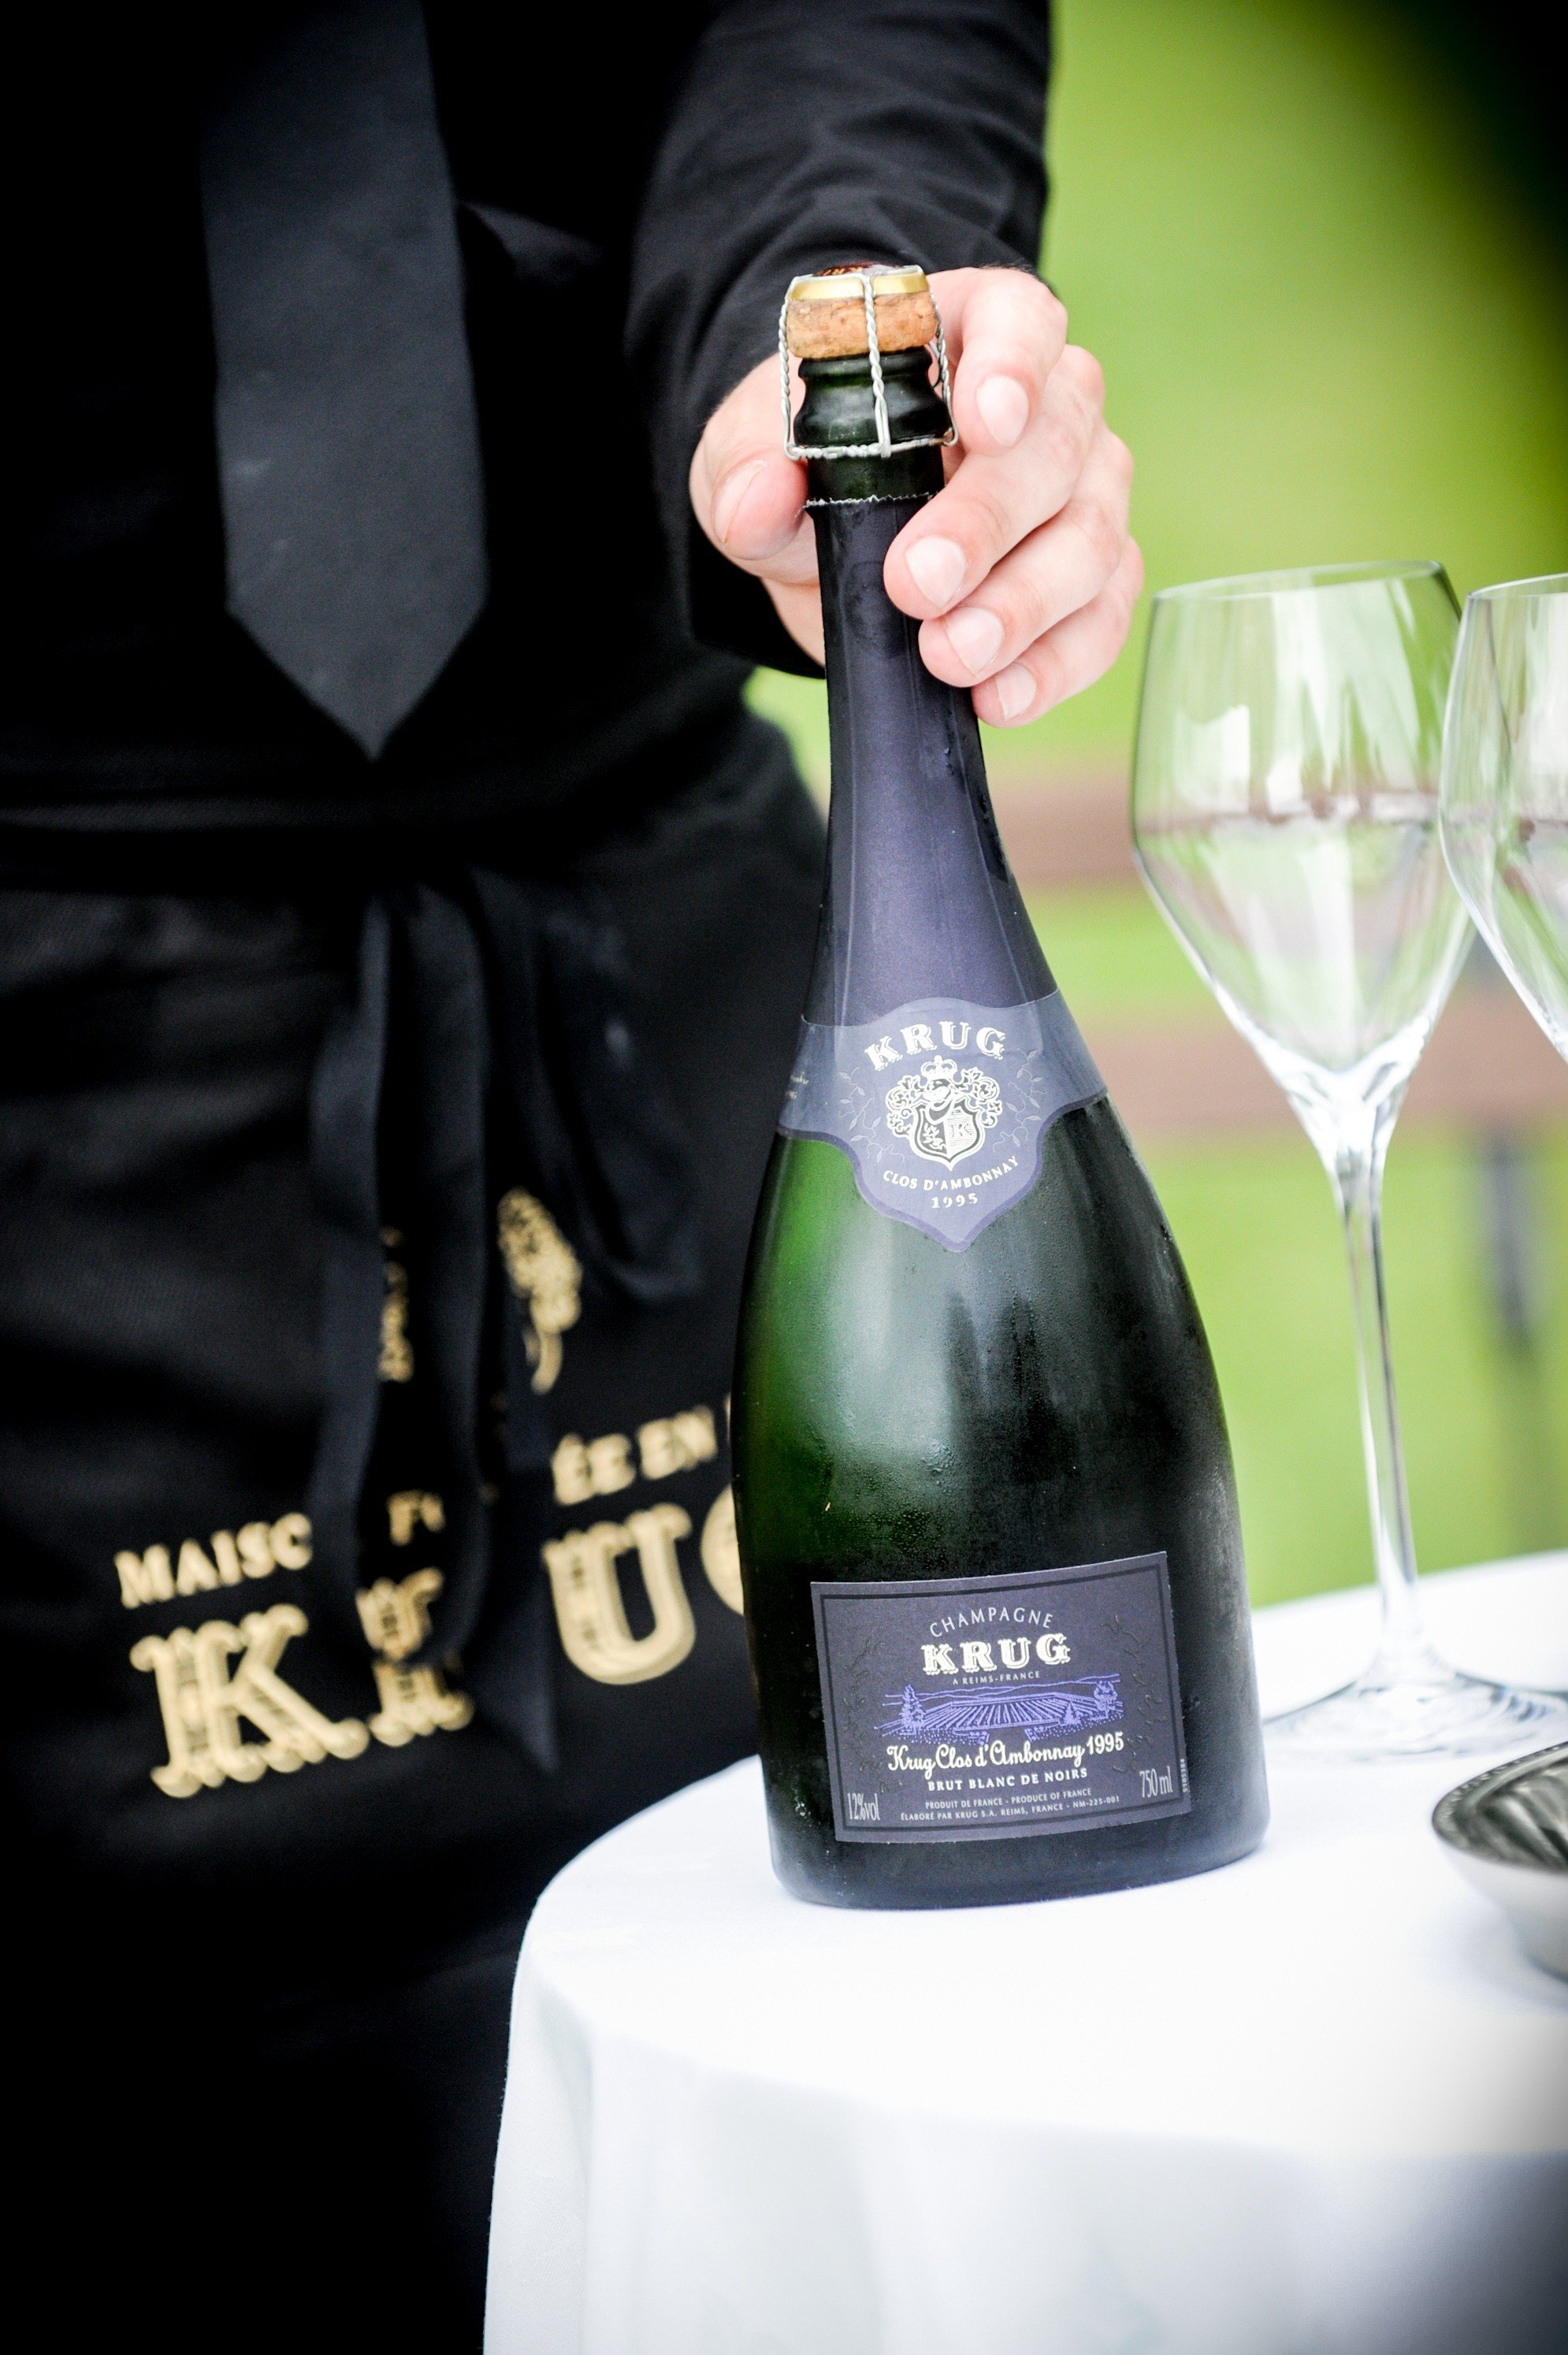 Champagne makers are innovating digitally and technologically to remain ahead of new rivals